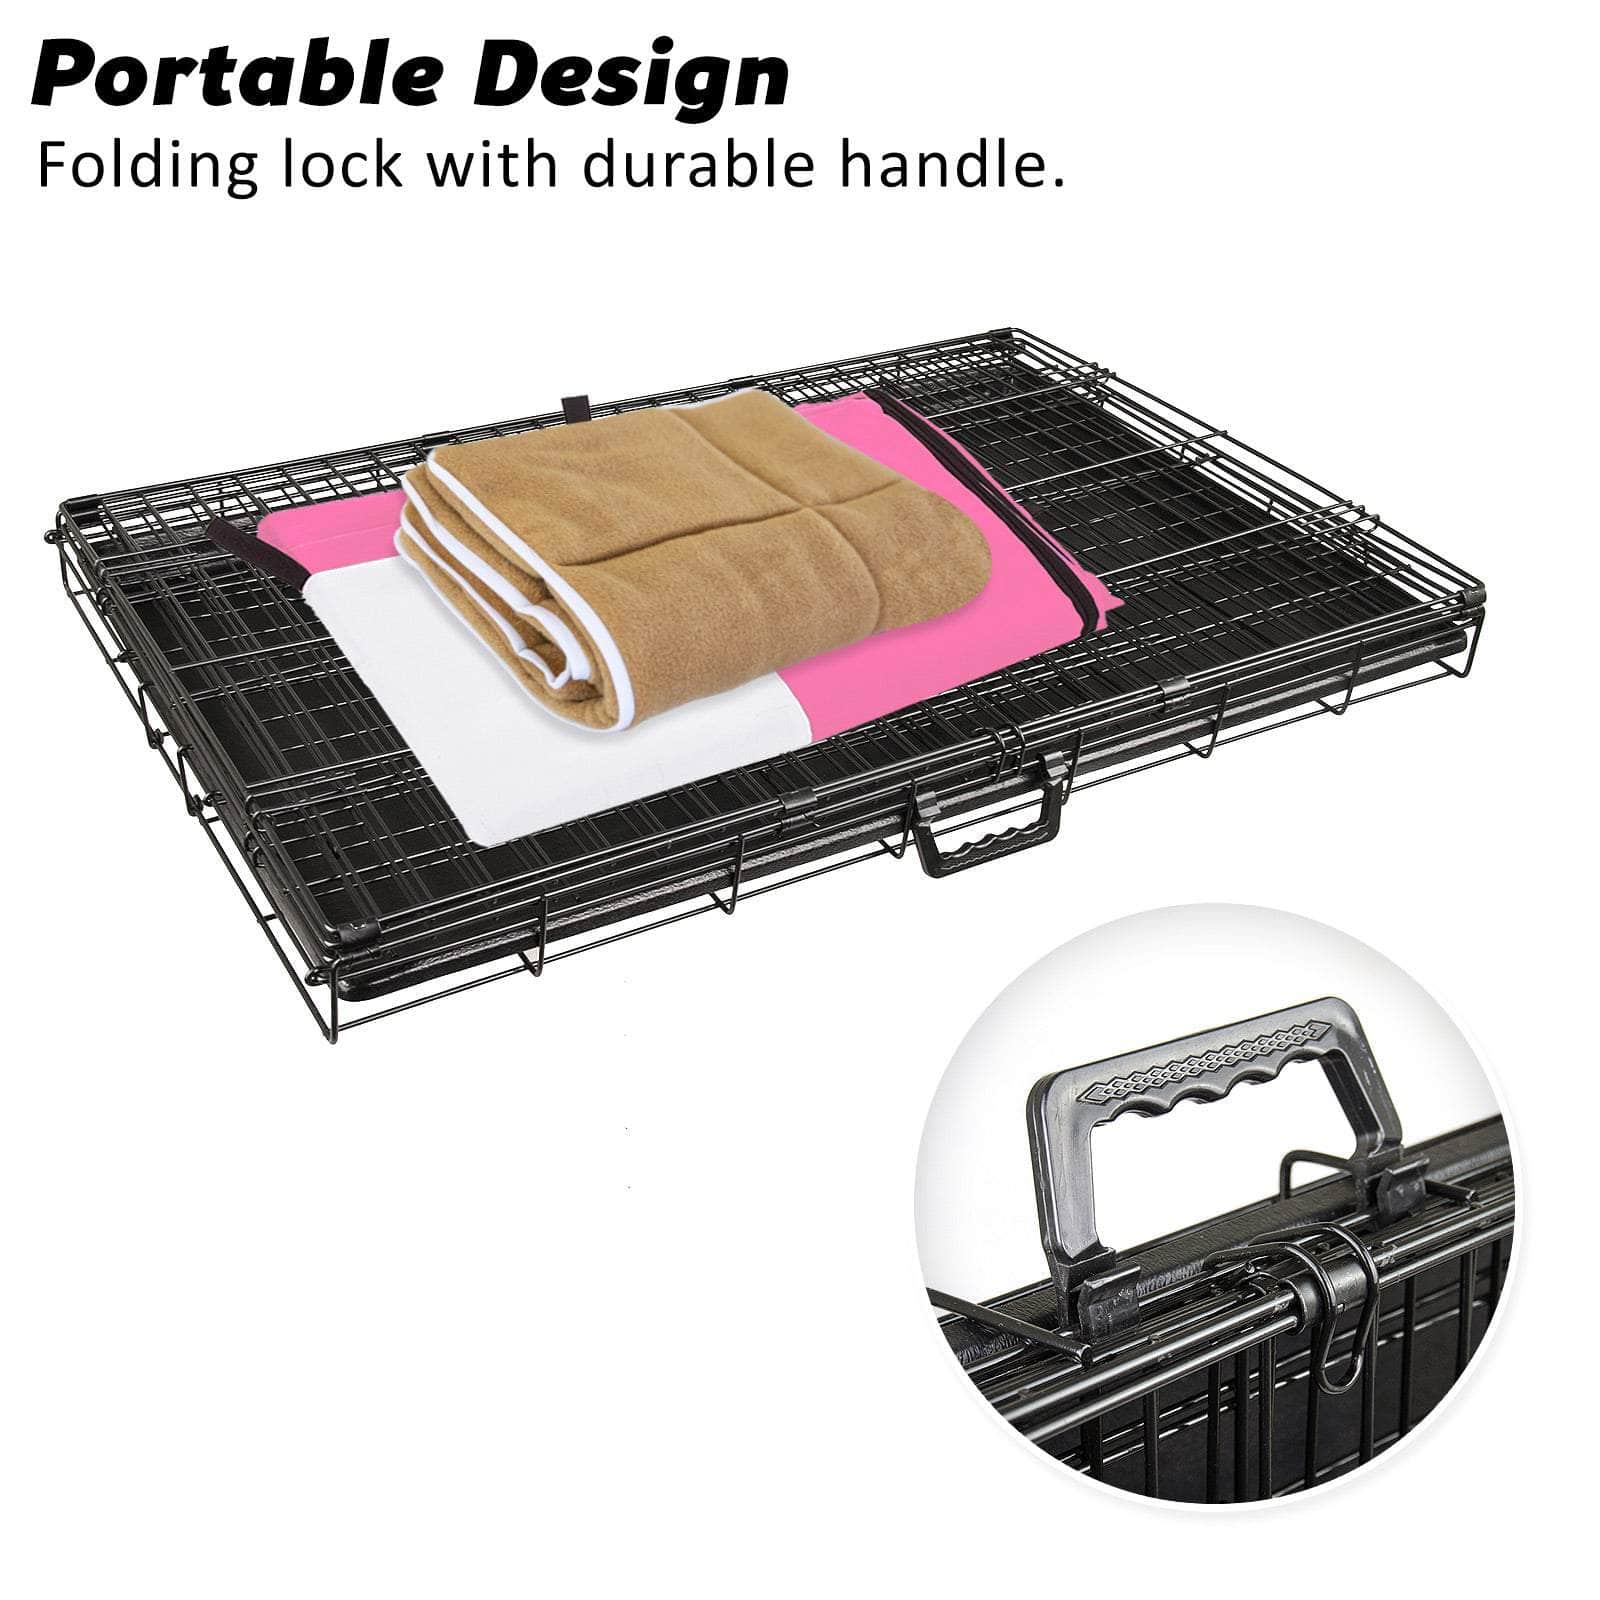 Wire Dog Cage Crate 30In With Tray + Cushion Mat + Pink Cover Combo